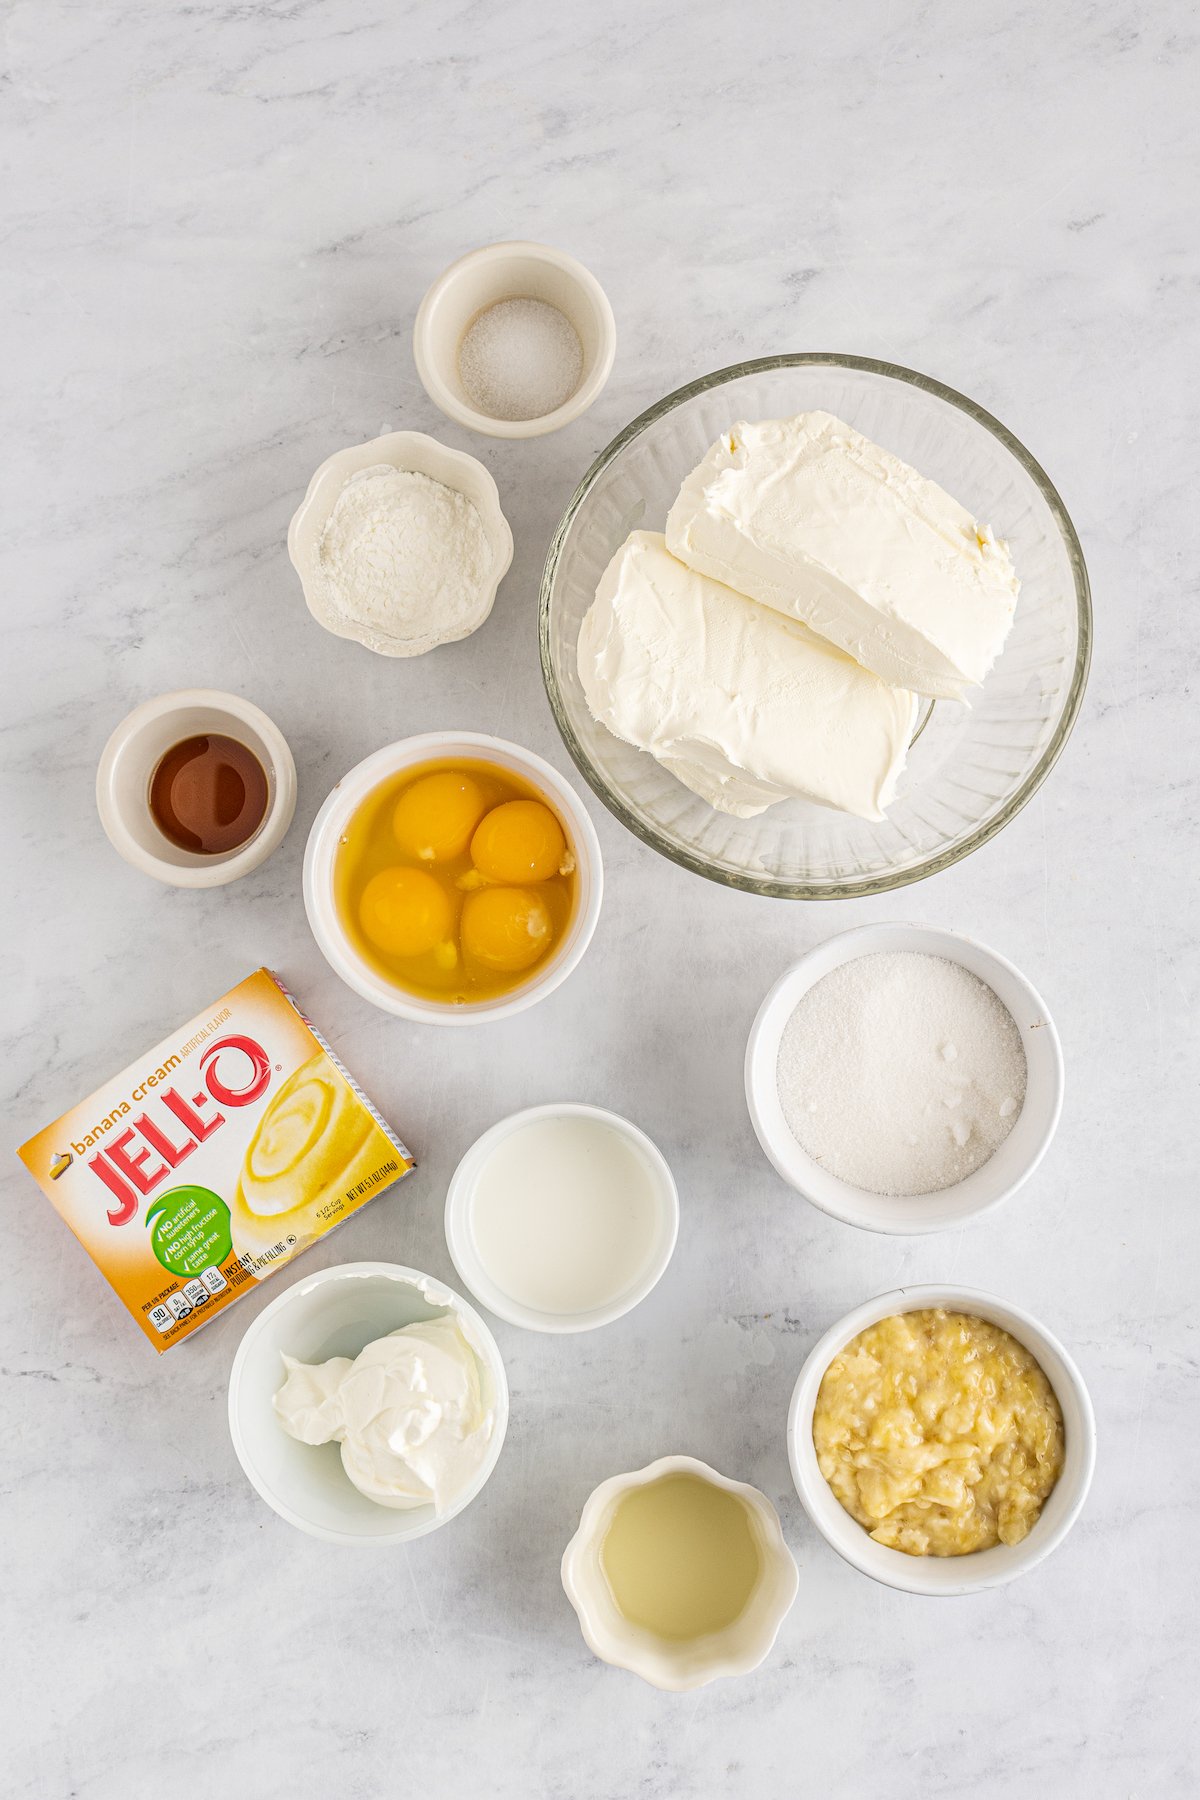 A bowl of cream cheese, a bowl of eggs, a bowl of mashed bananas, a bowl of heavy cream, a bowl of granulated sugar, a bowl of sour cream, a bowl of lemon juice, a bowl of vanilla extract, a bowl of salt, a bowl of cornstarch, and a Jell-O packed of banana cream pudding